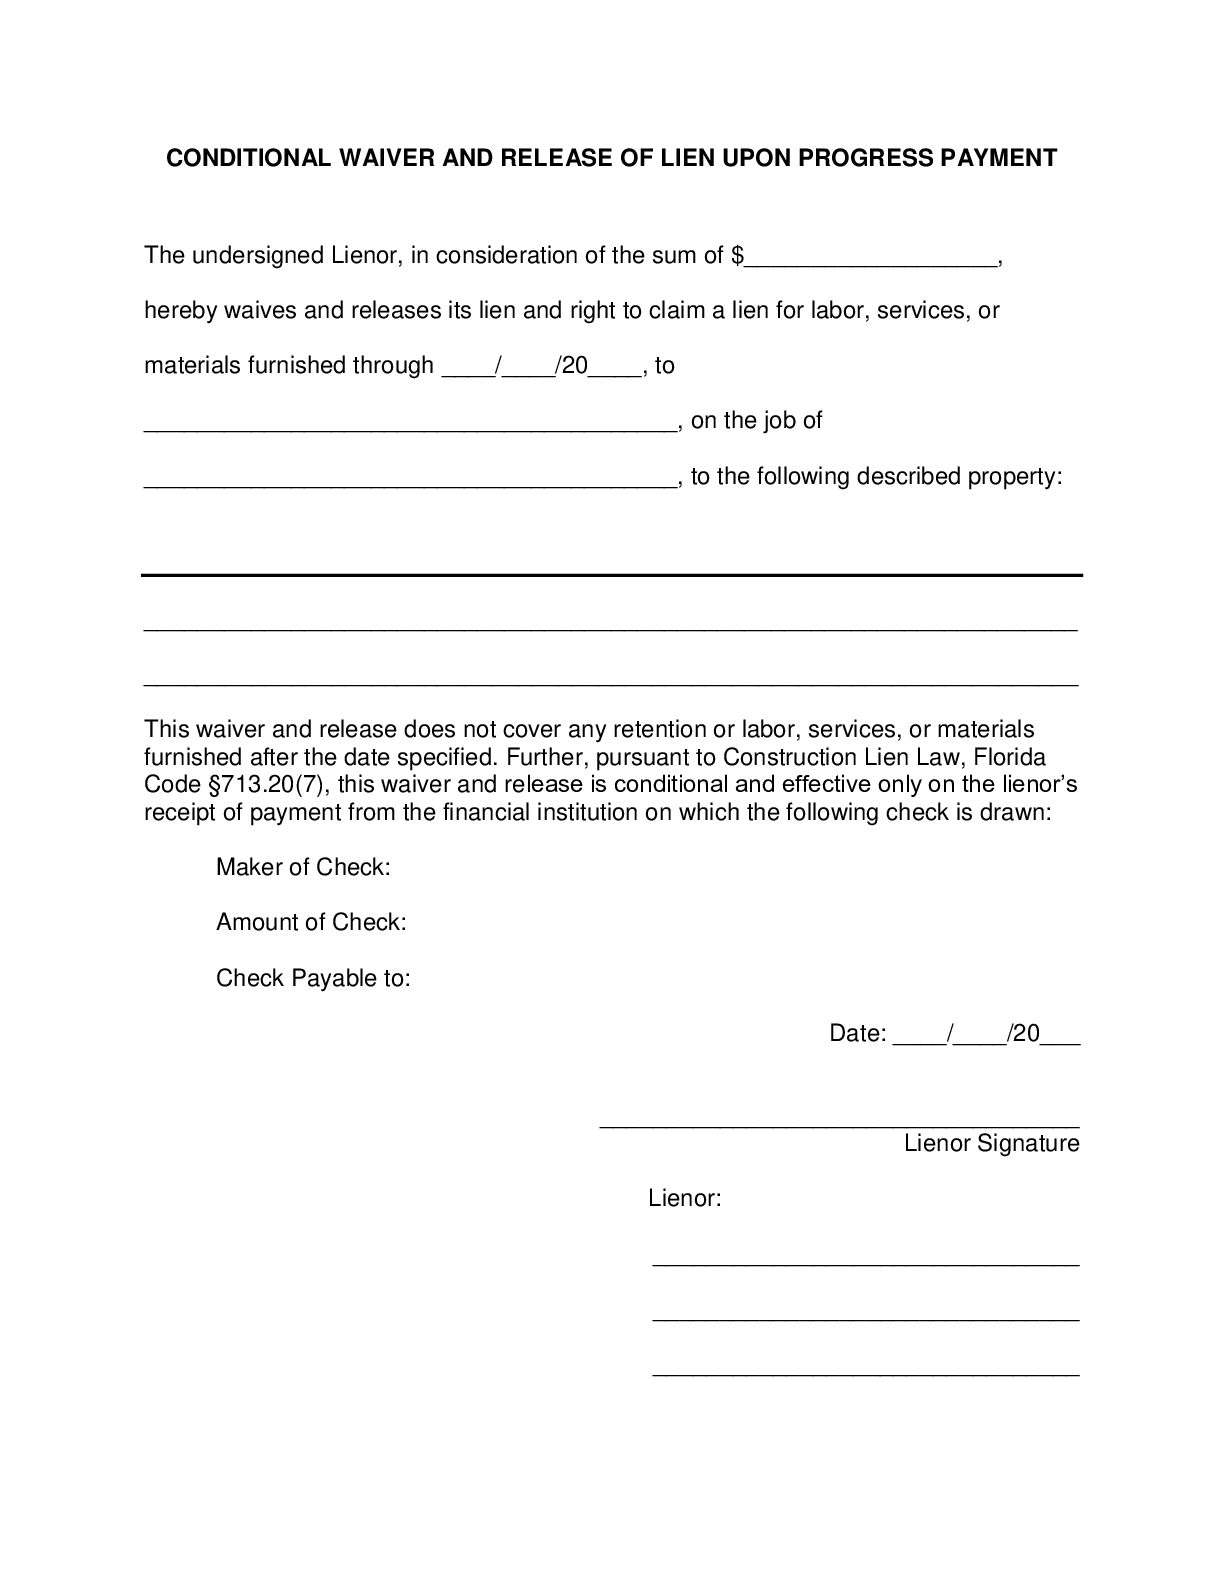 Florida Partial Conditional Lien Waiver and Release Form - free from